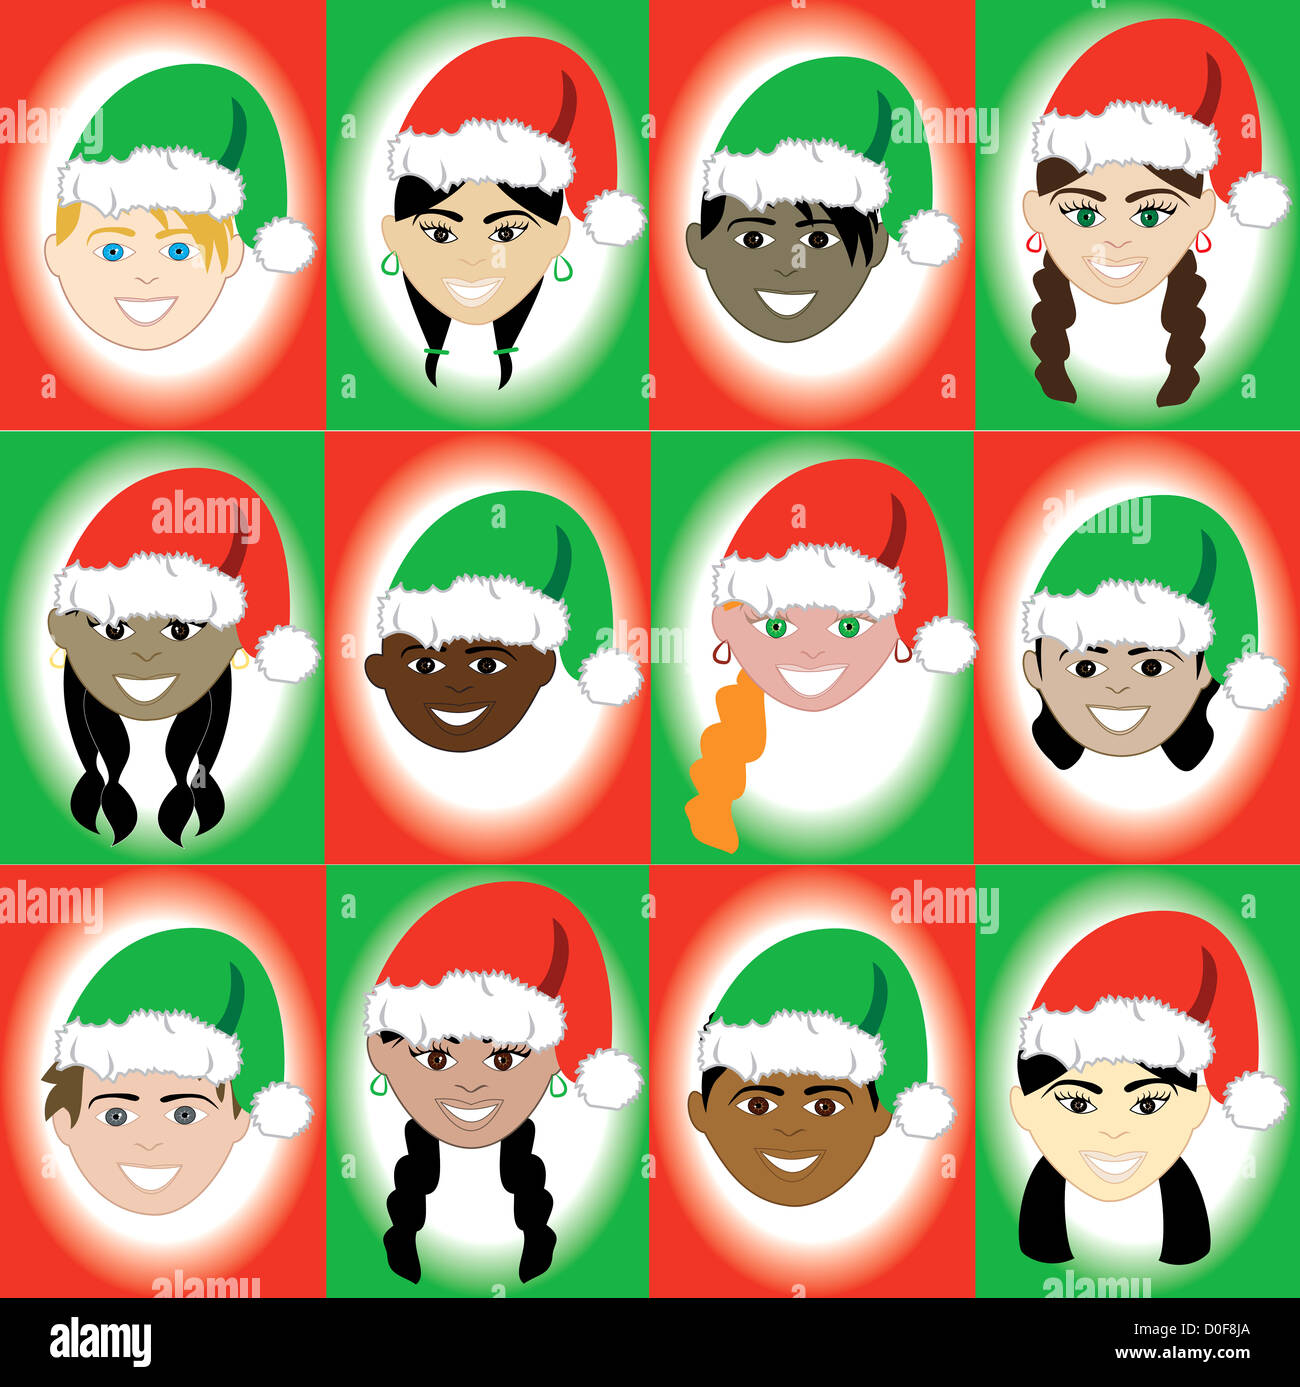 Illustration of 12 kids of different ethnic backgrounds for the Holidays. Stock Photo